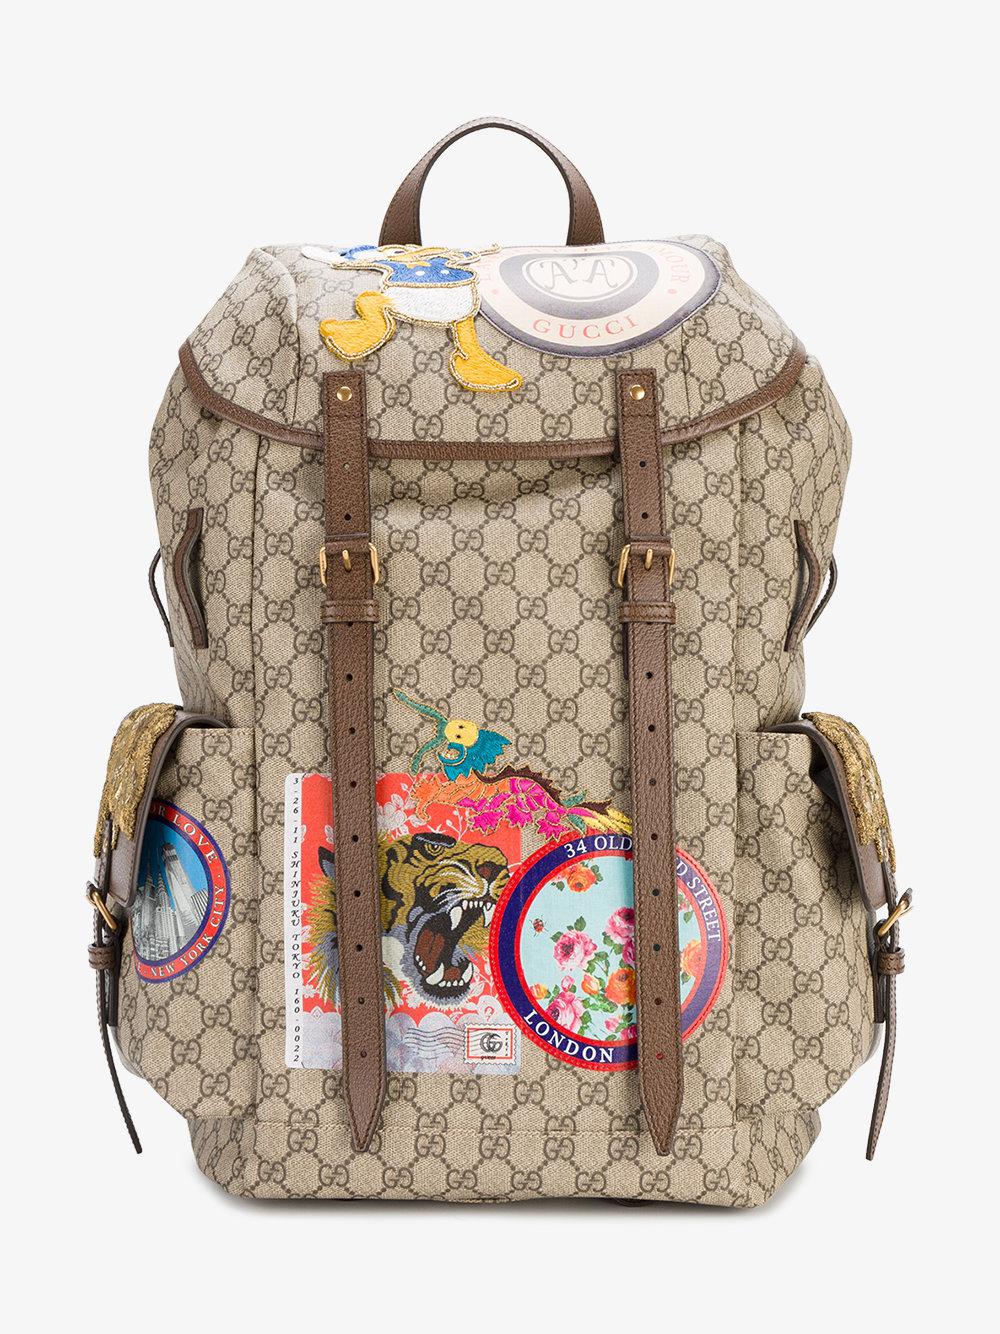 Gucci Canvas Multi-patch Gg Supreme Backpack in Brown for Men - Lyst